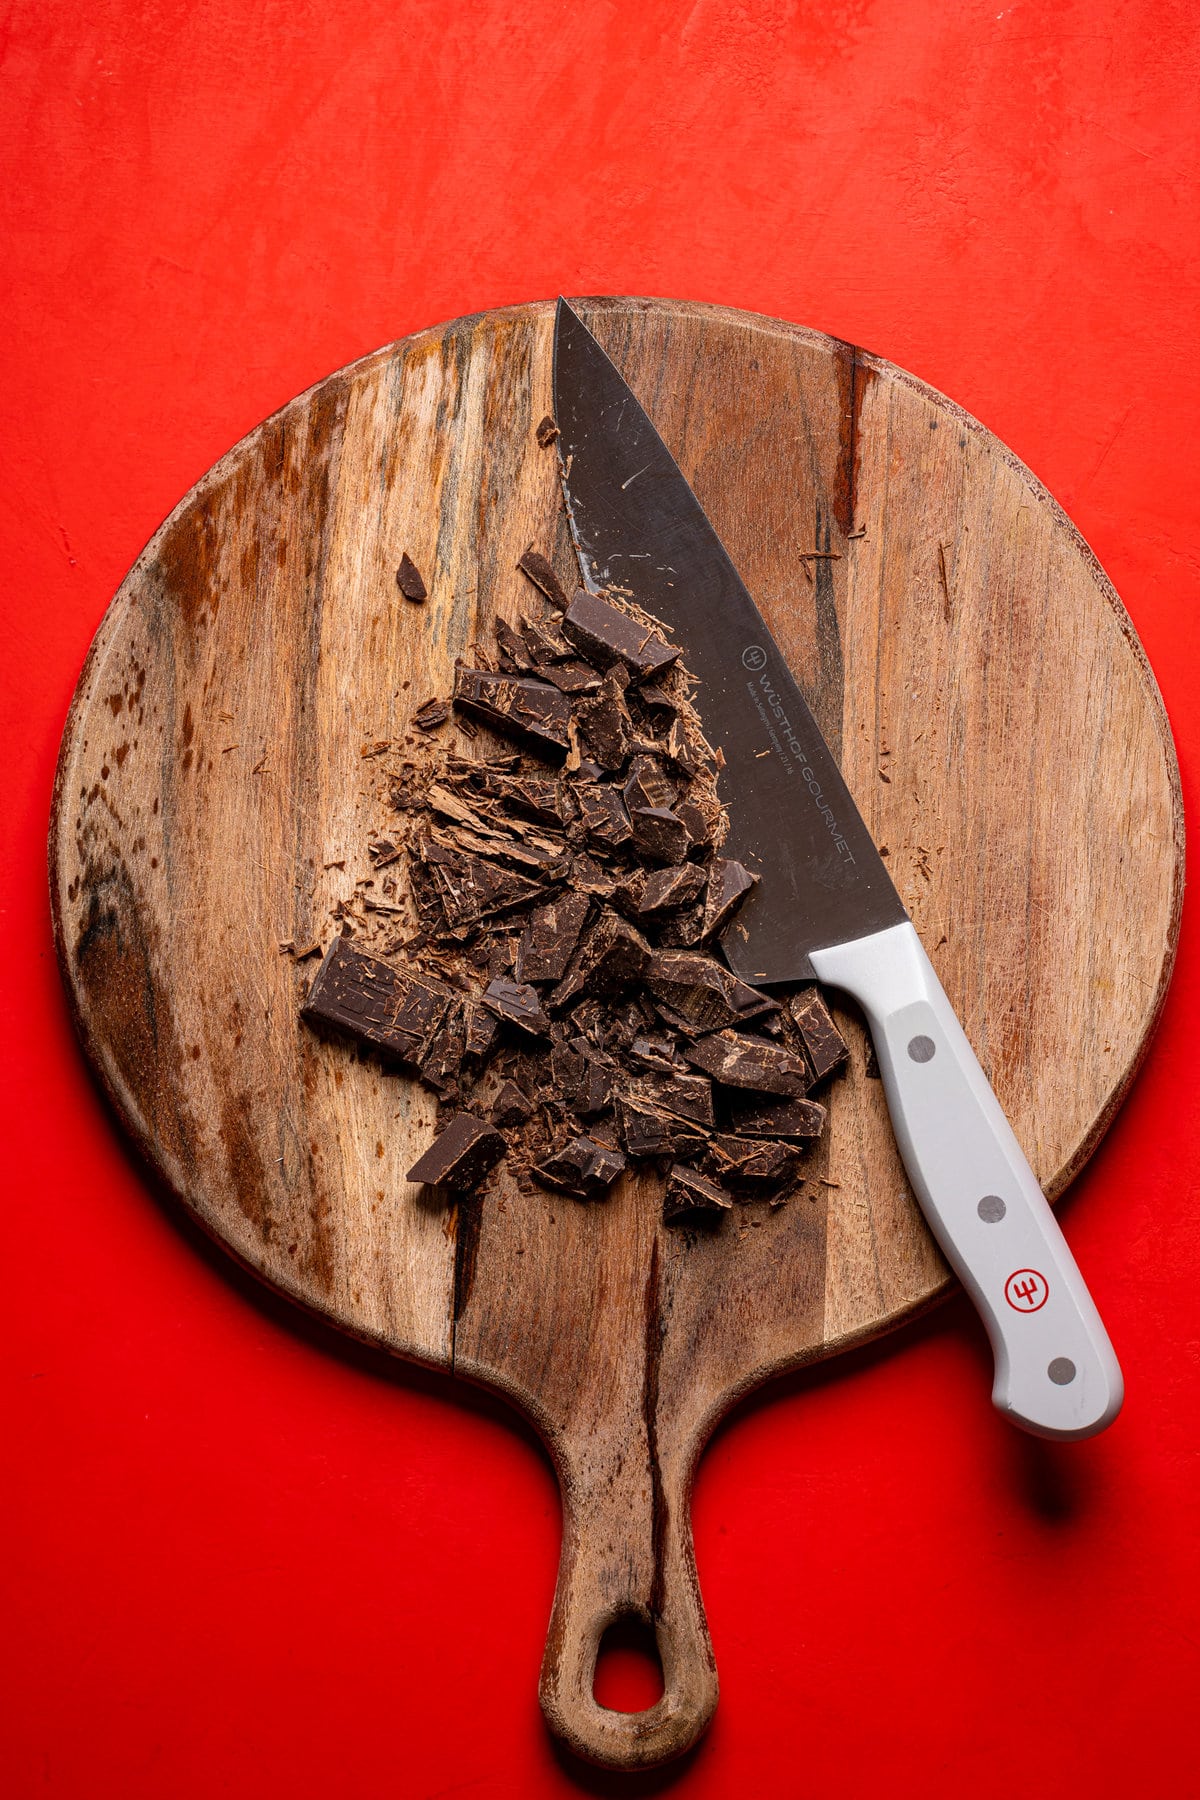 Chopped chocolate on a cutting board with a knife